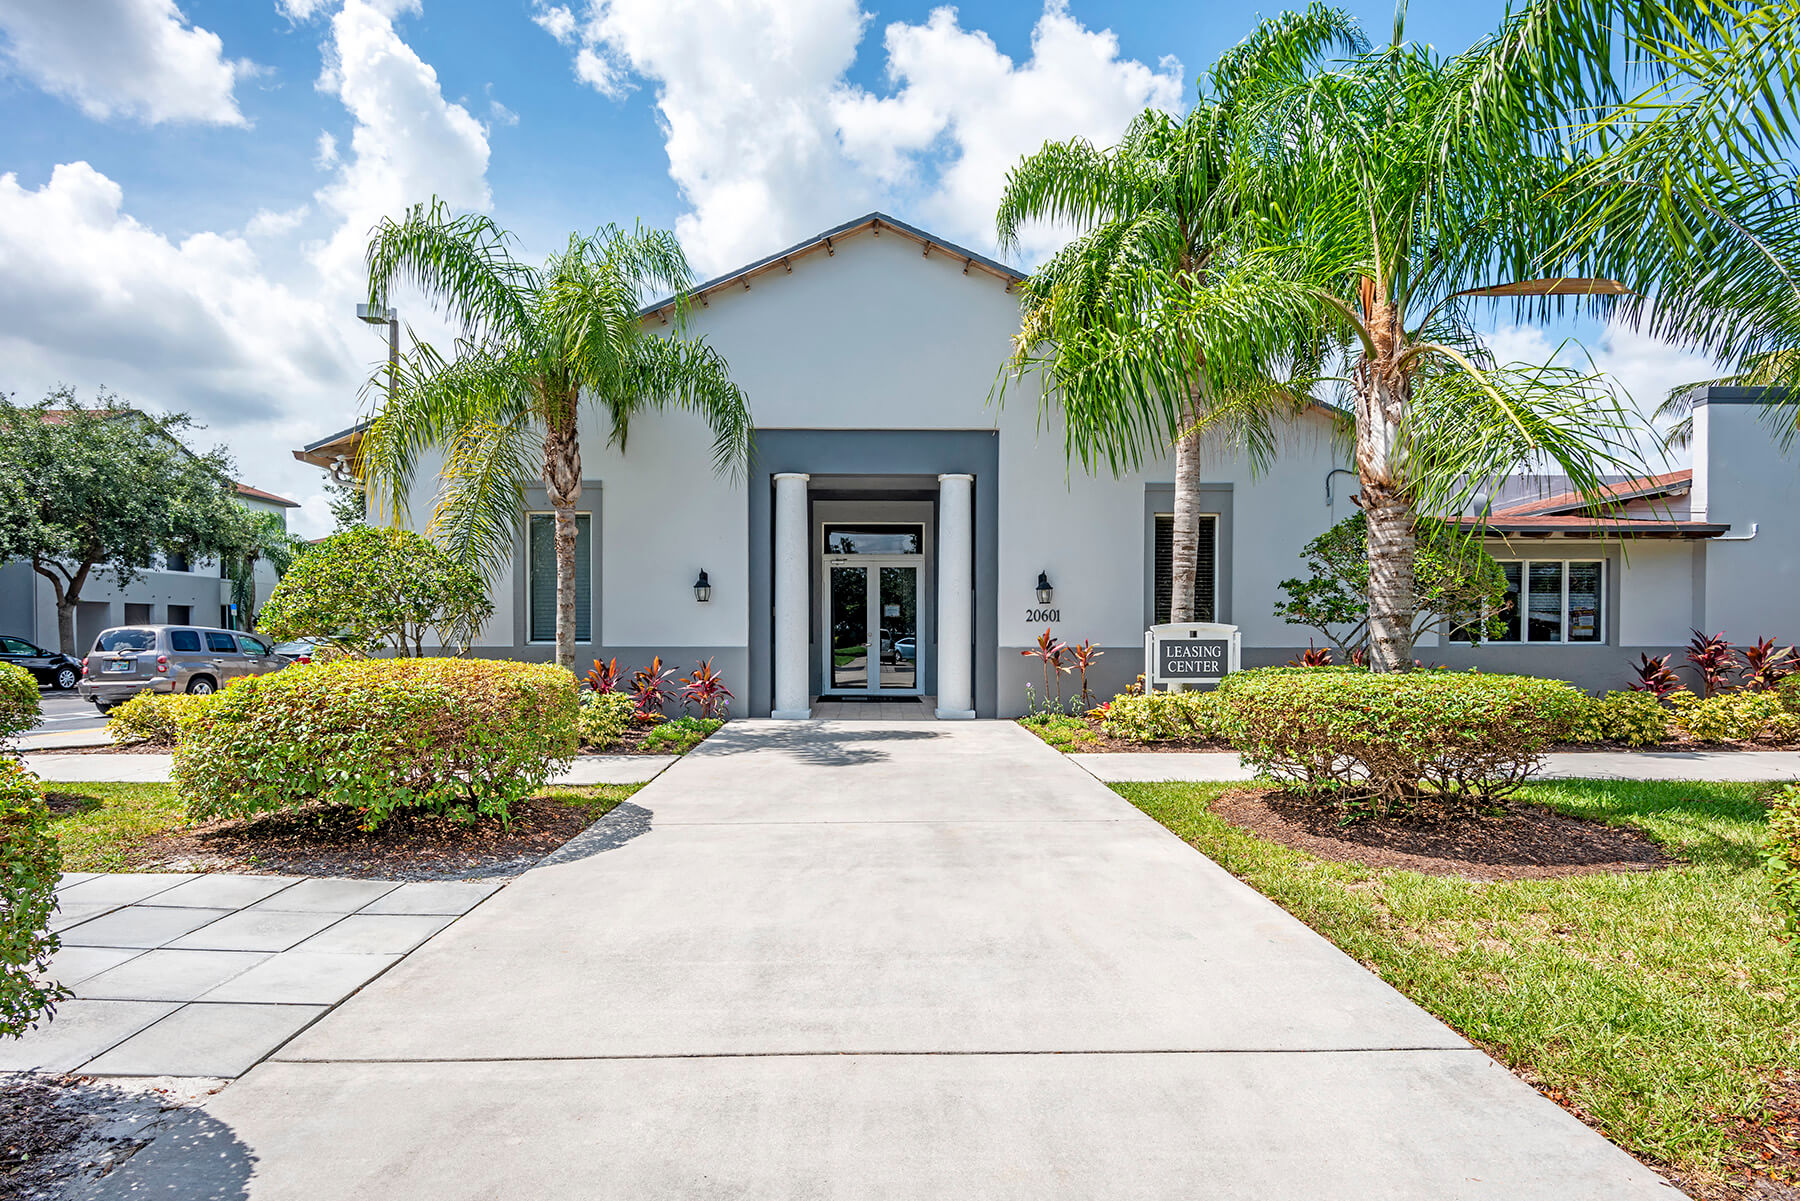 The building exterior of the leasing center at the Cedar Grove Apartments in Miami, Florida.